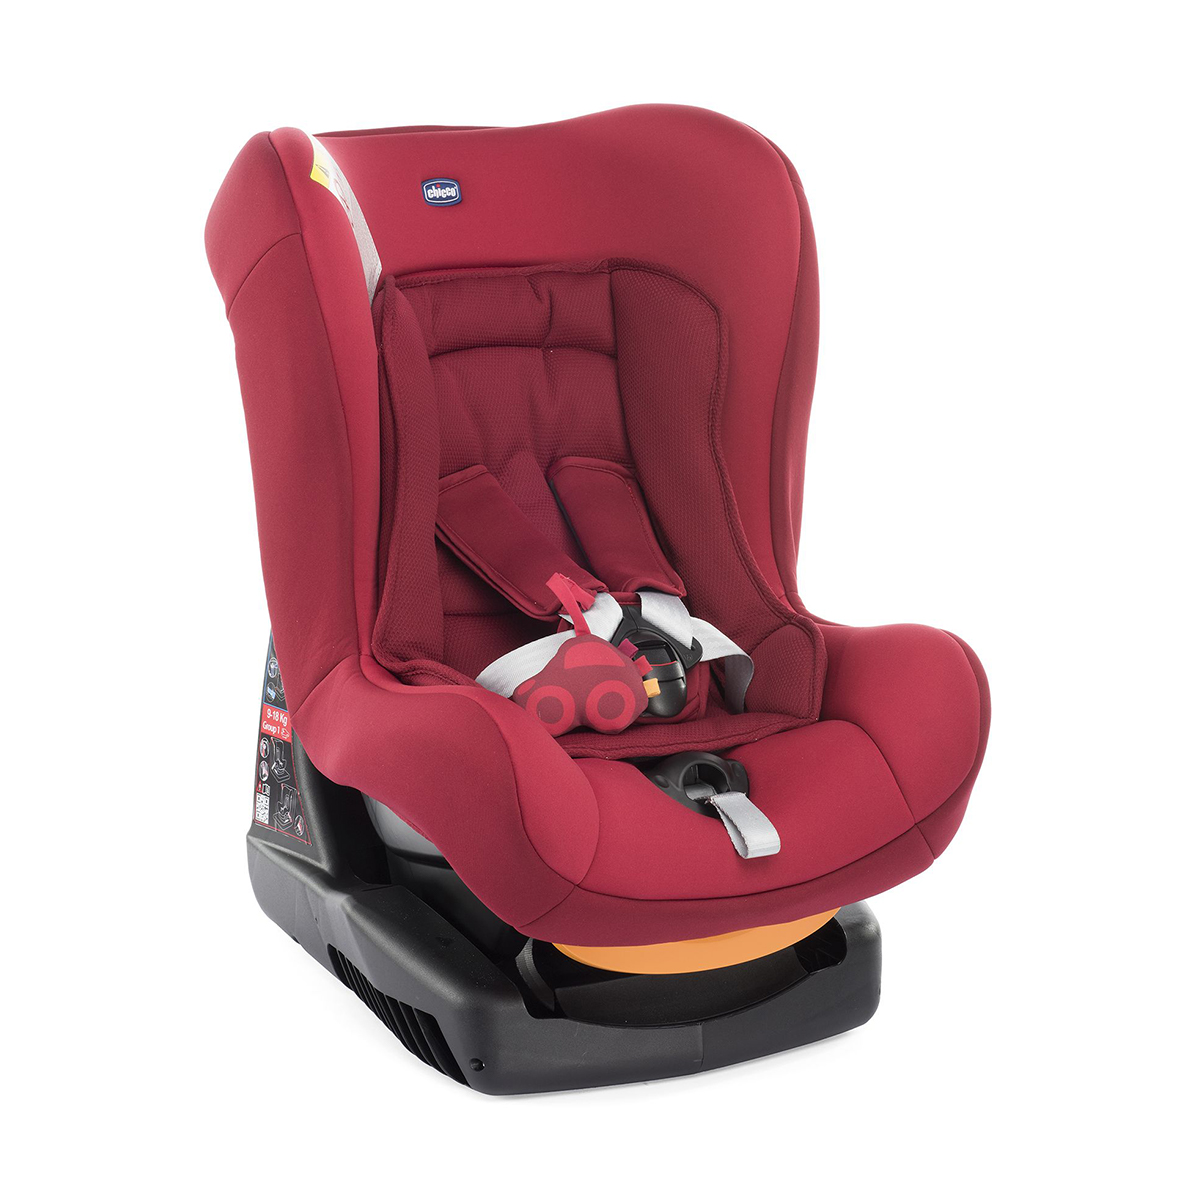 COSMOS BABY CAR SEAT RED PASSION - Chicco Bahrain